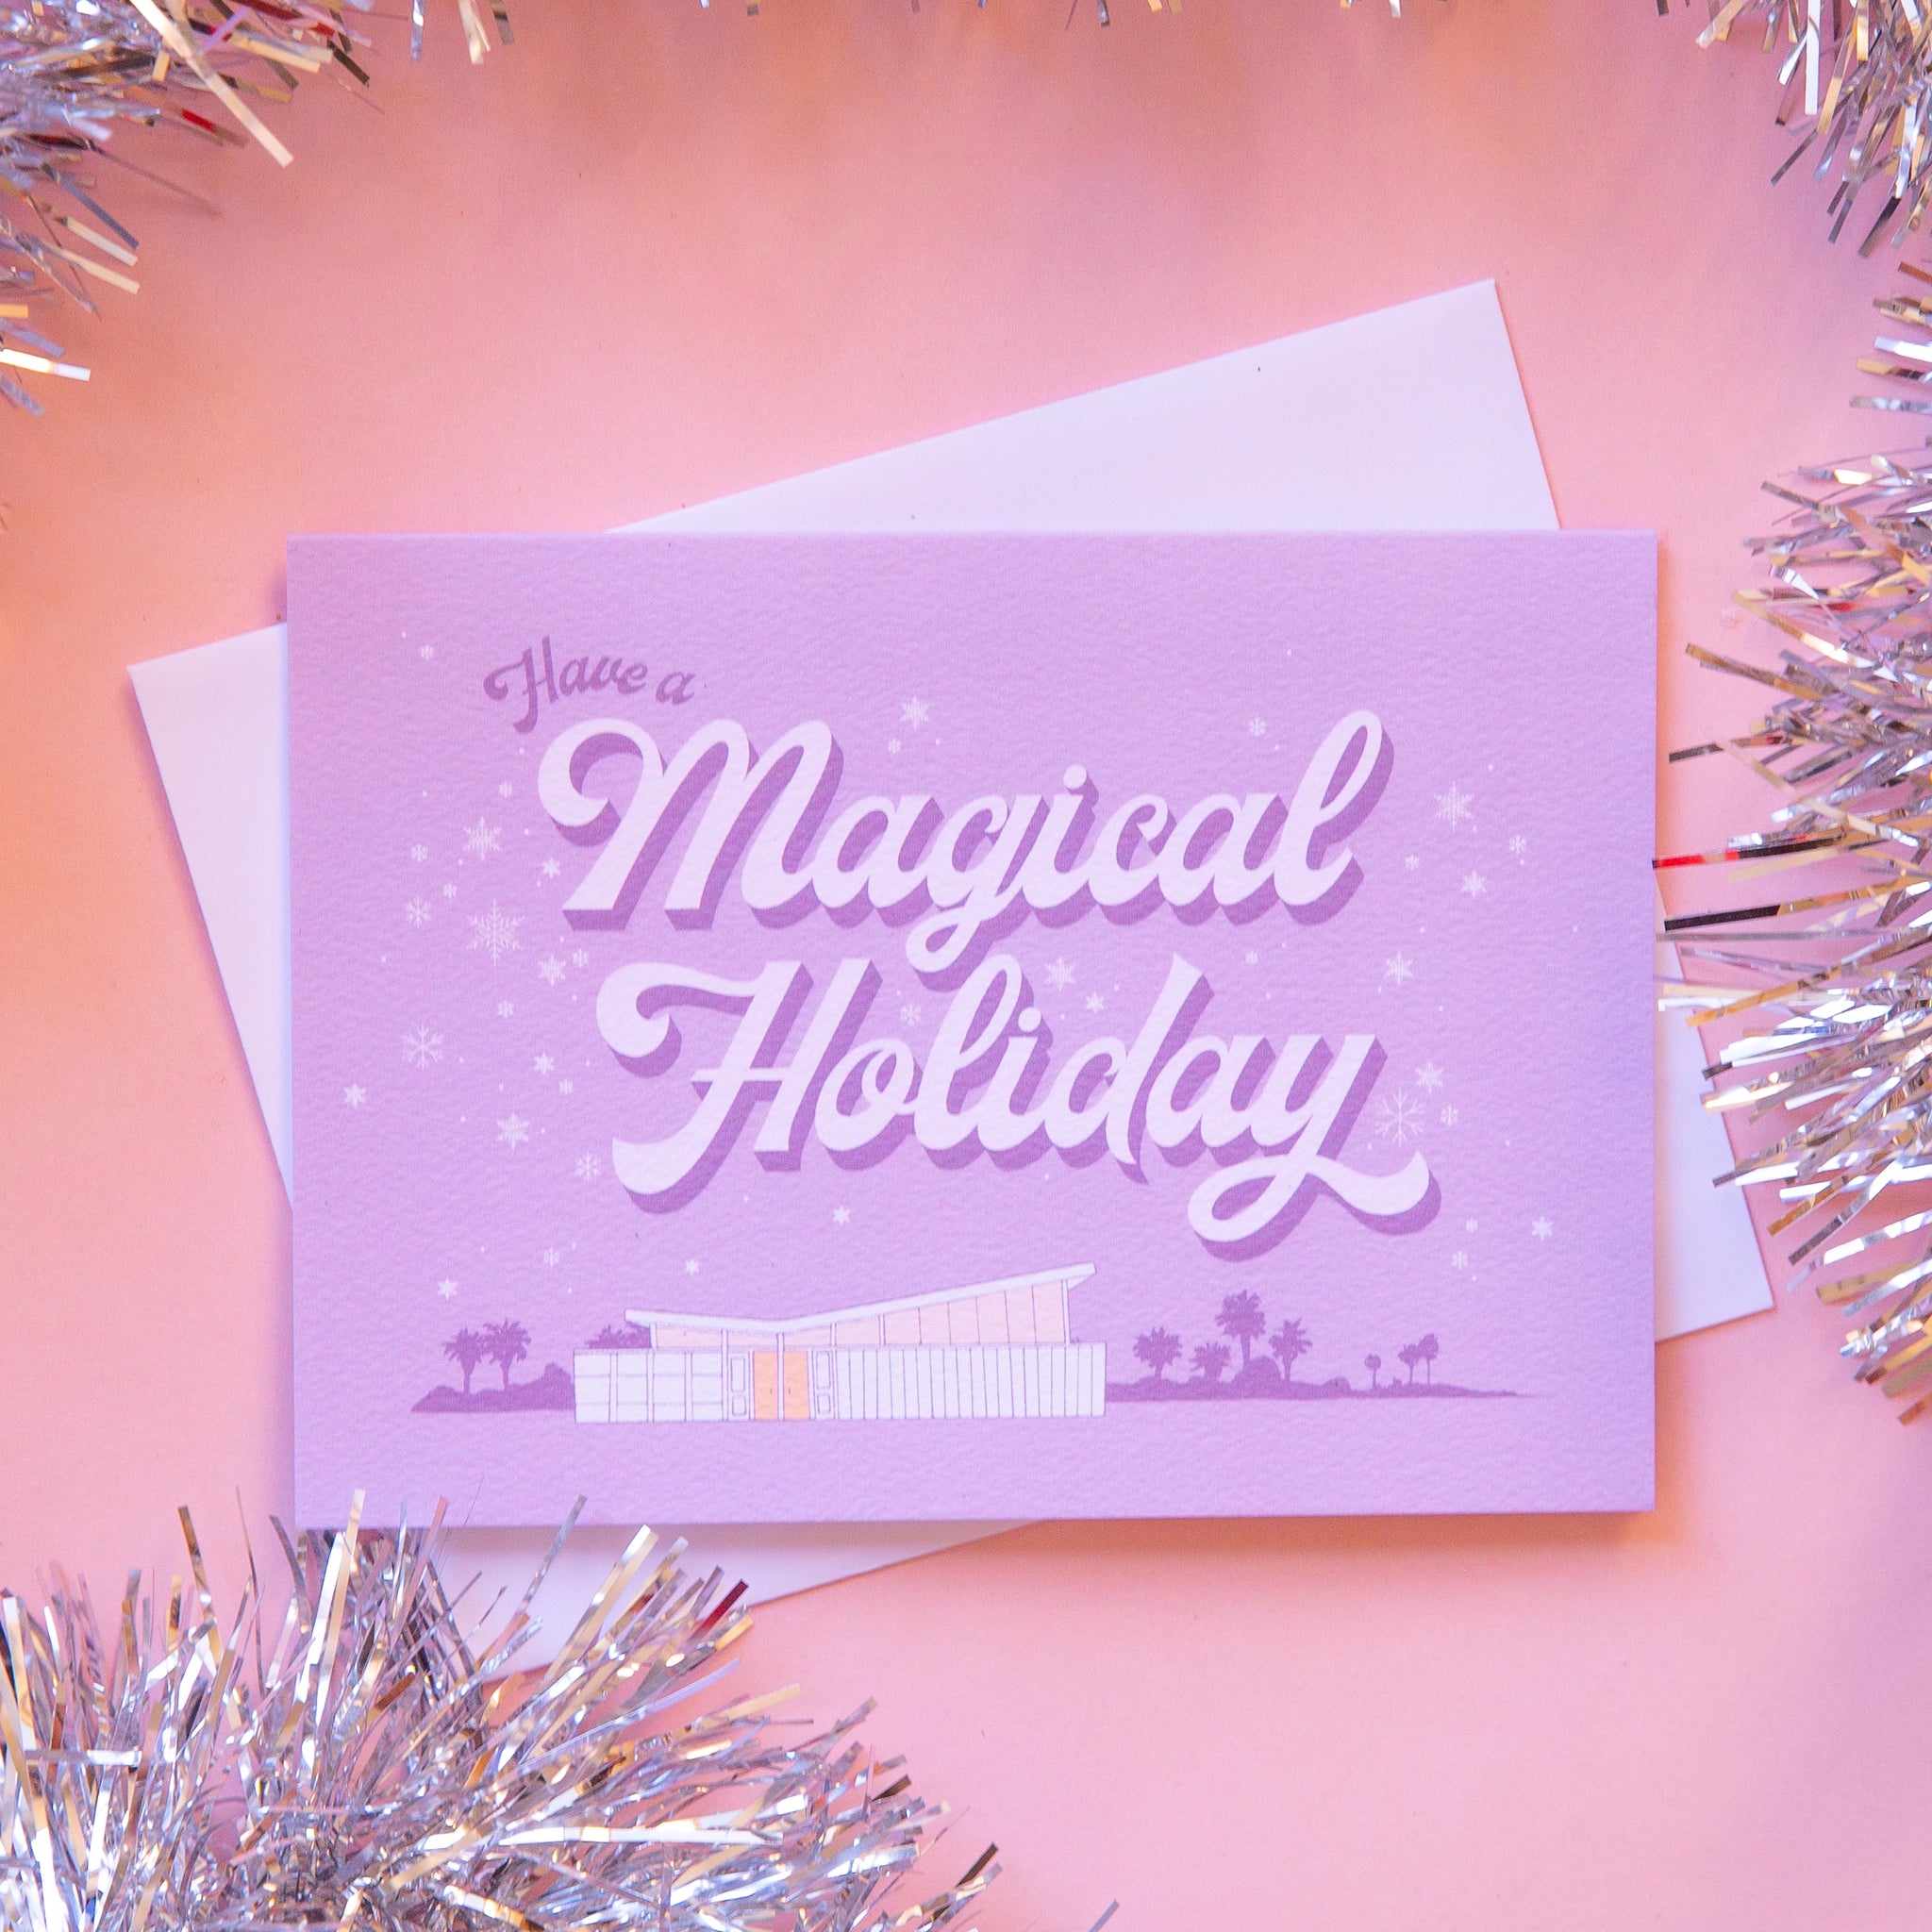 Lilac holiday card that reads &#39;have a a magical holiday&#39; in cursive lettering. Around the text is delicate white snowflakes. Below is a coastal scene of a beach house and palm trees.